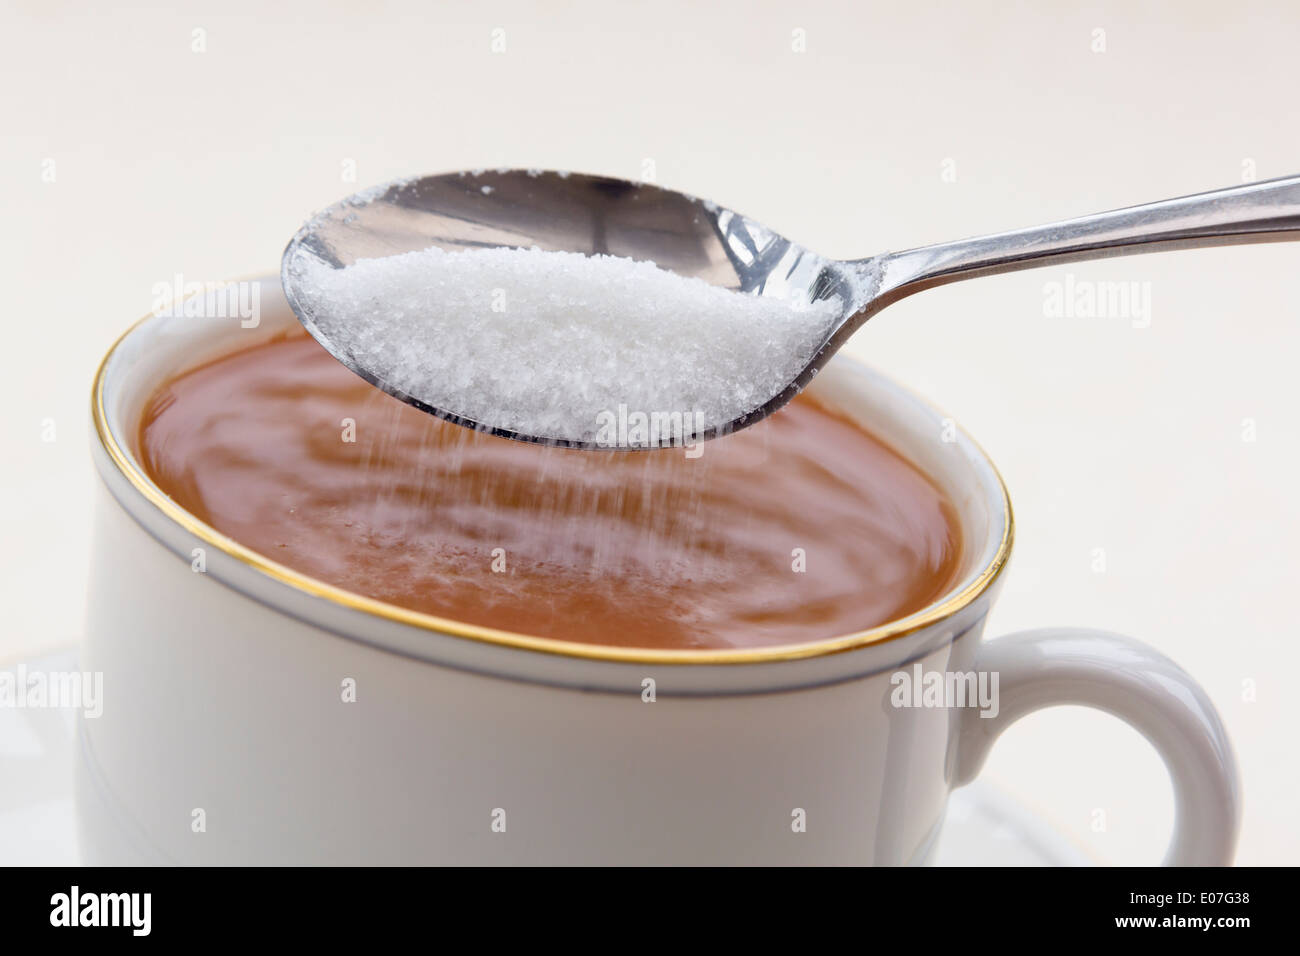 Adding A Spoon Of White Granulated Sugar Into A Cup Of Tea In A Teacup Can Contribute To Diabetes And Extra Calories Weight Gain England Uk Stock Photo Alamy